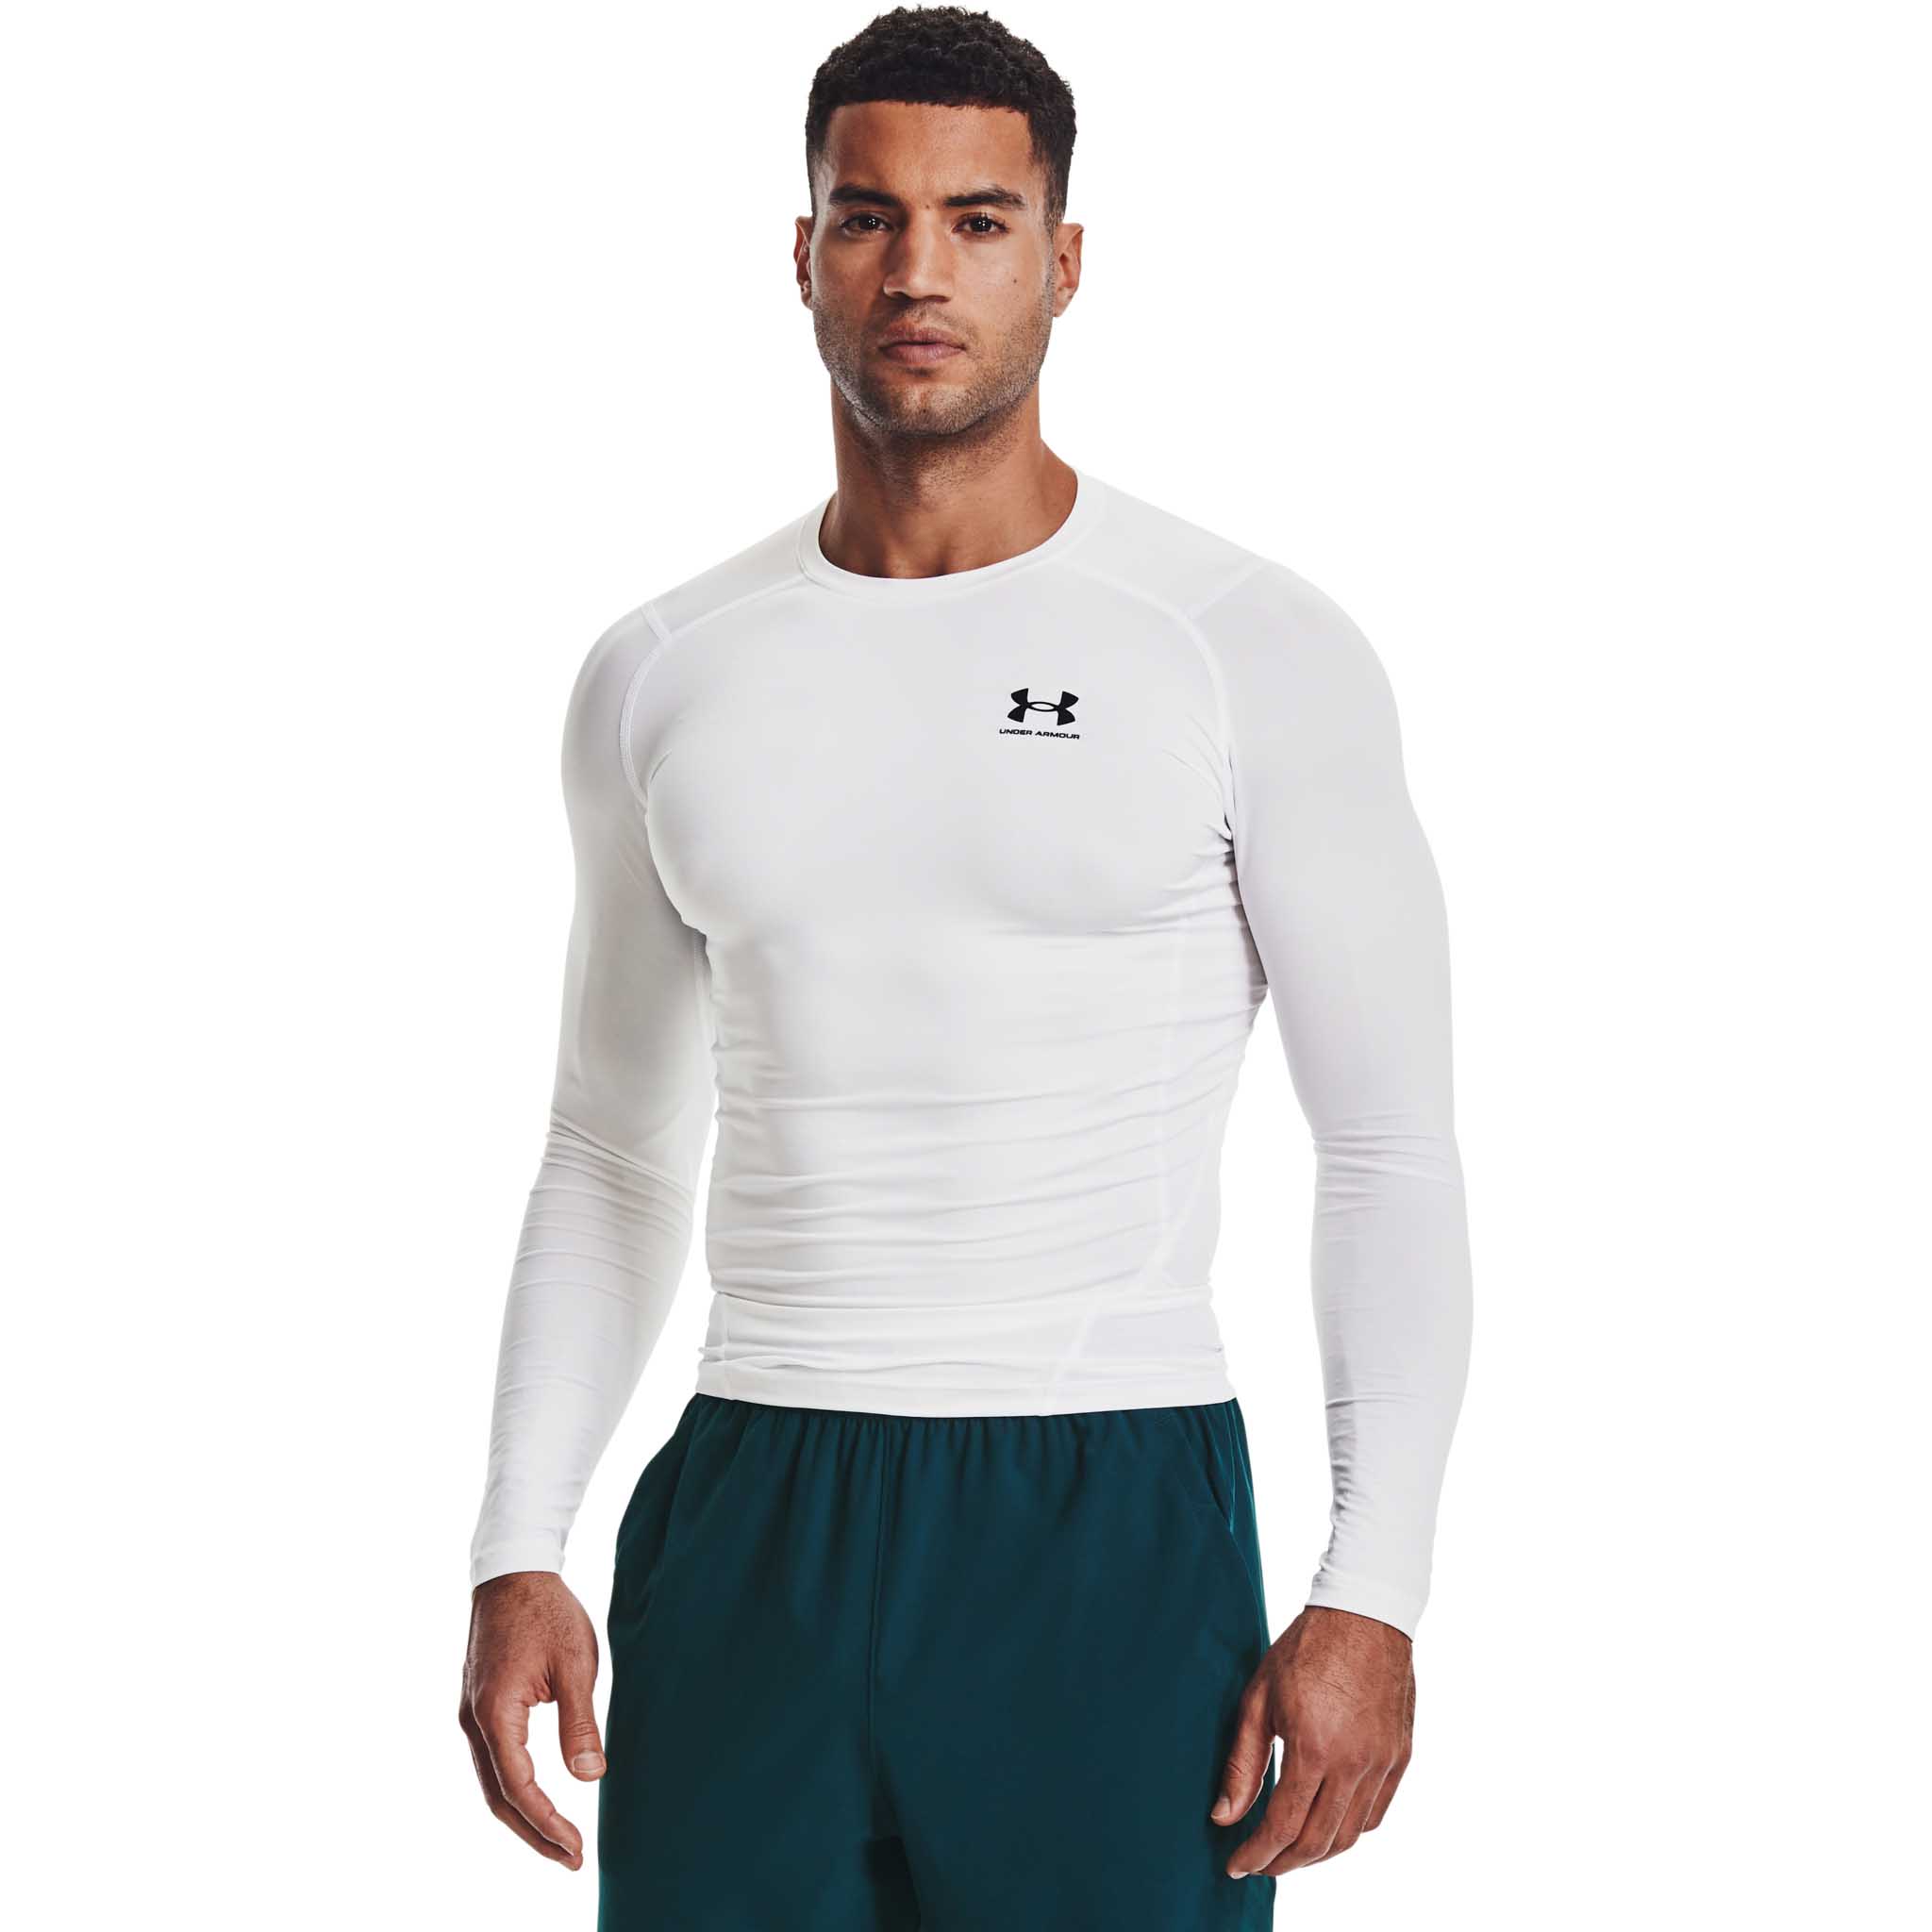 Under Armour Men's Amplify Thermal Shirt  Long sleeve tshirt men, Thermal  shirt, Under armour men